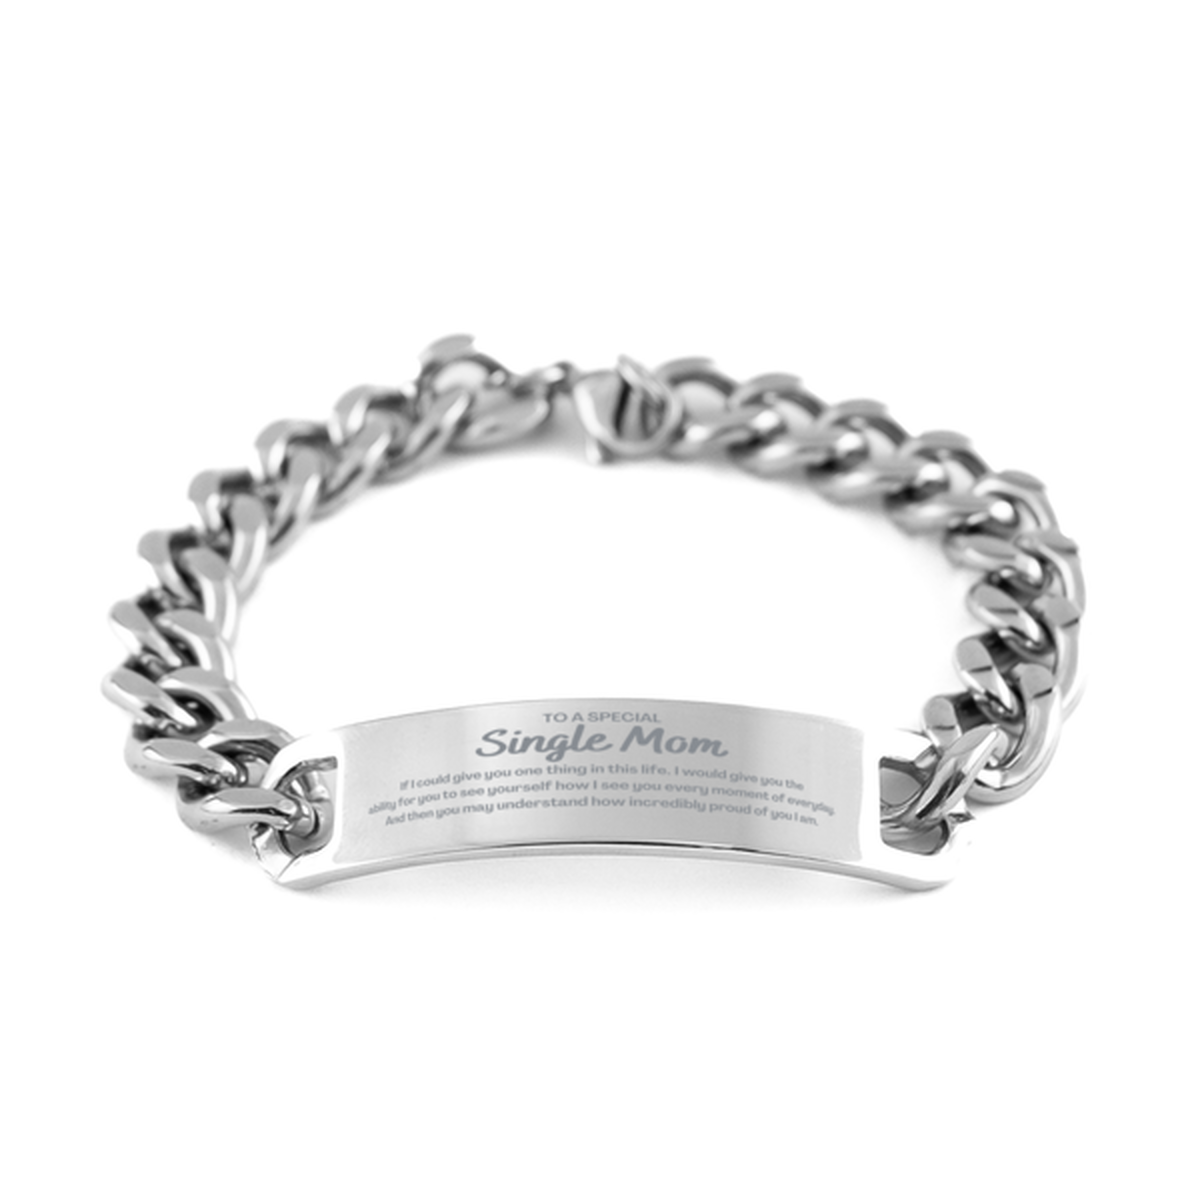 To My Single Mom Cuban Chain Stainless Steel Bracelet, Gifts For Single Mom Engraved, Inspirational Gifts for Christmas Birthday, Epic Gifts for Single Mom To A Special Single Mom how incredibly proud of you I am